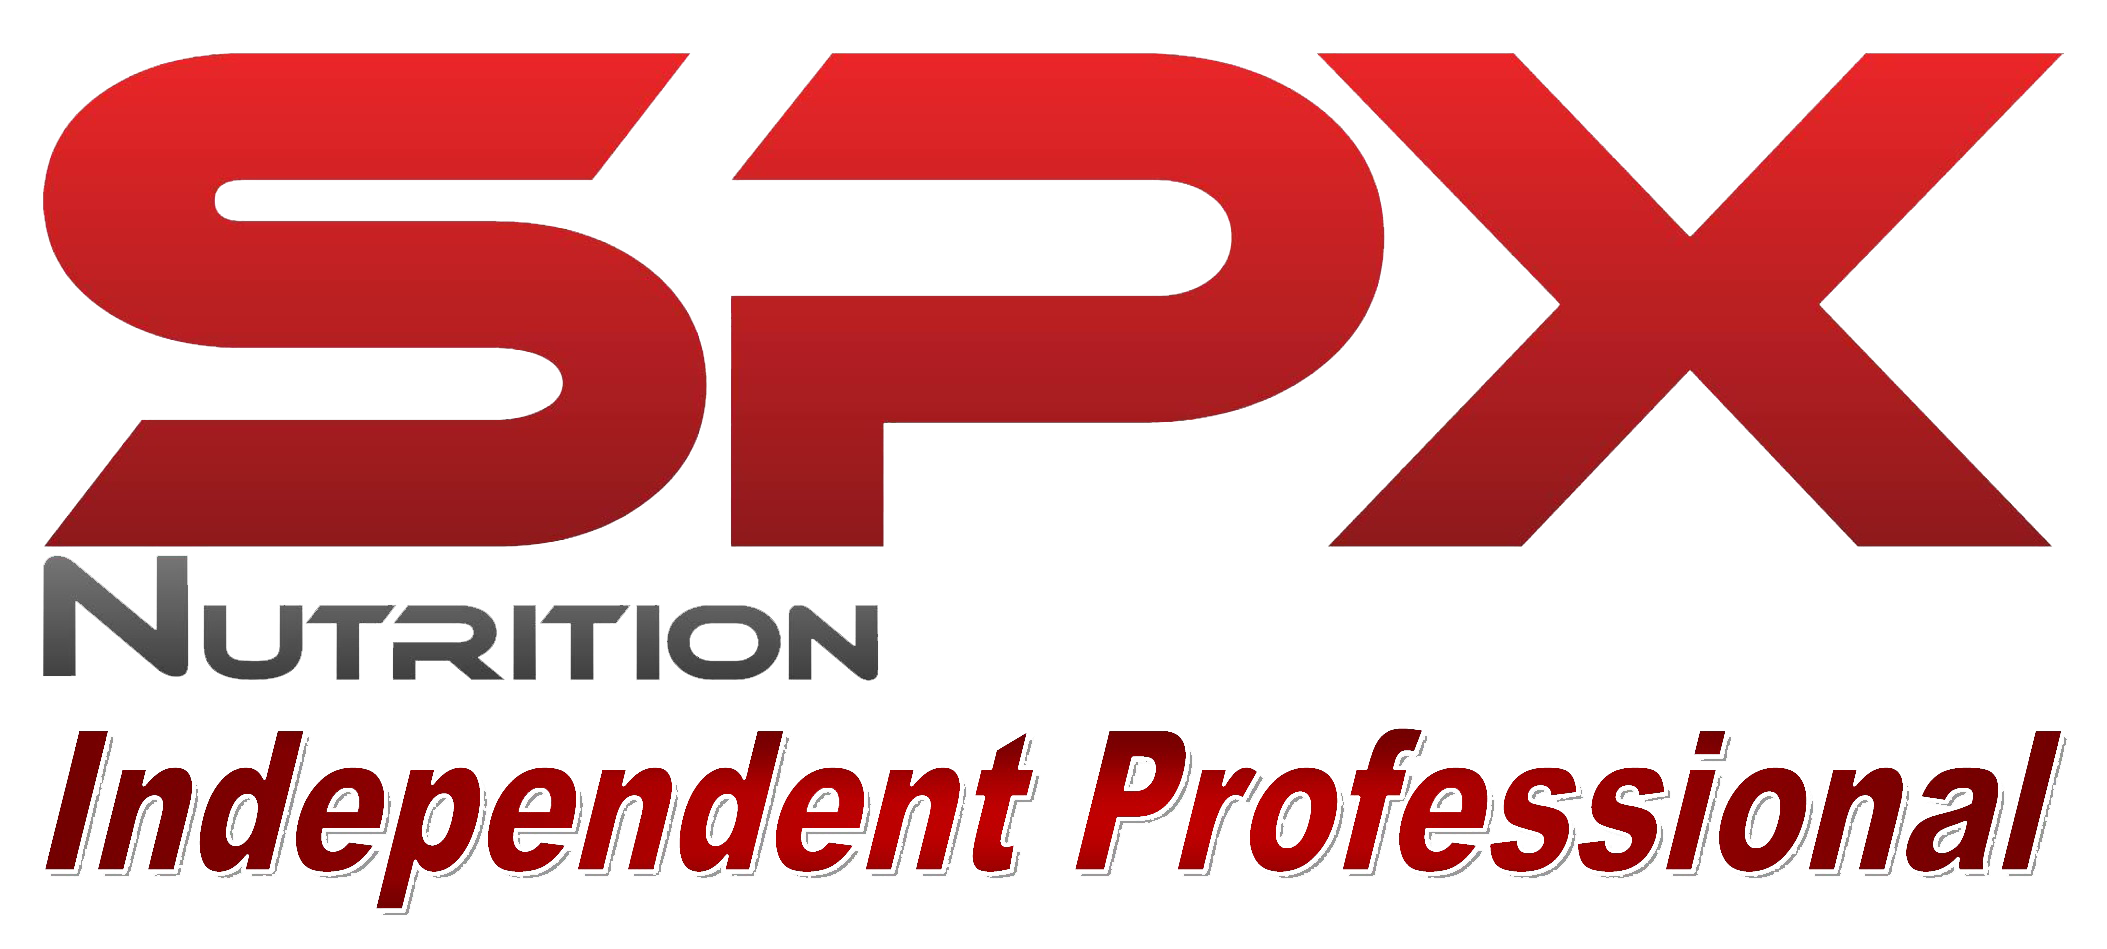 ExperienceSPX – Video Introduction Services by Envision